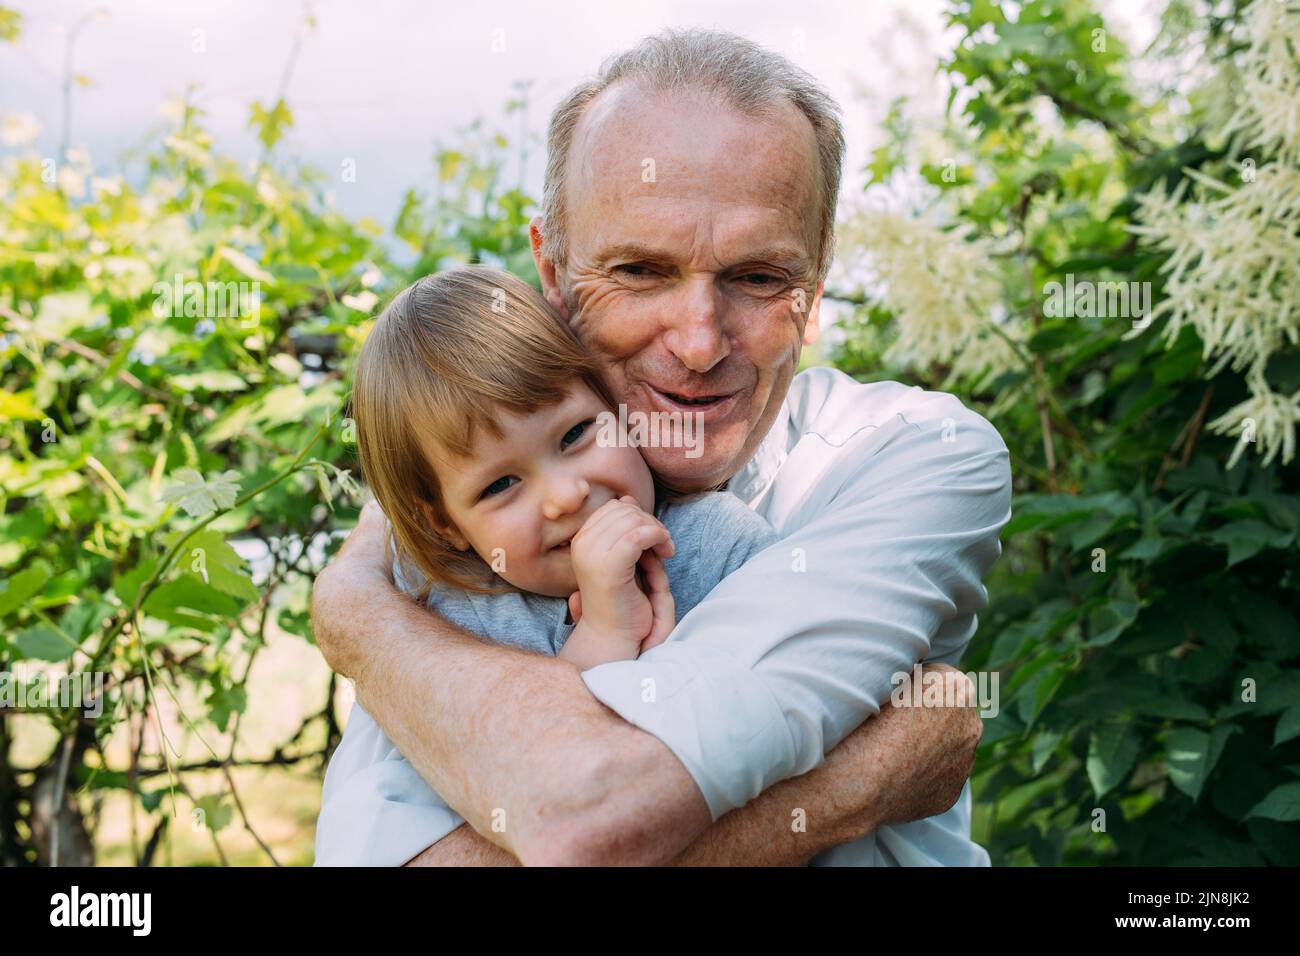 A little girl hugs her grandfather on a walk in the summer outdoors.  Stock Photo